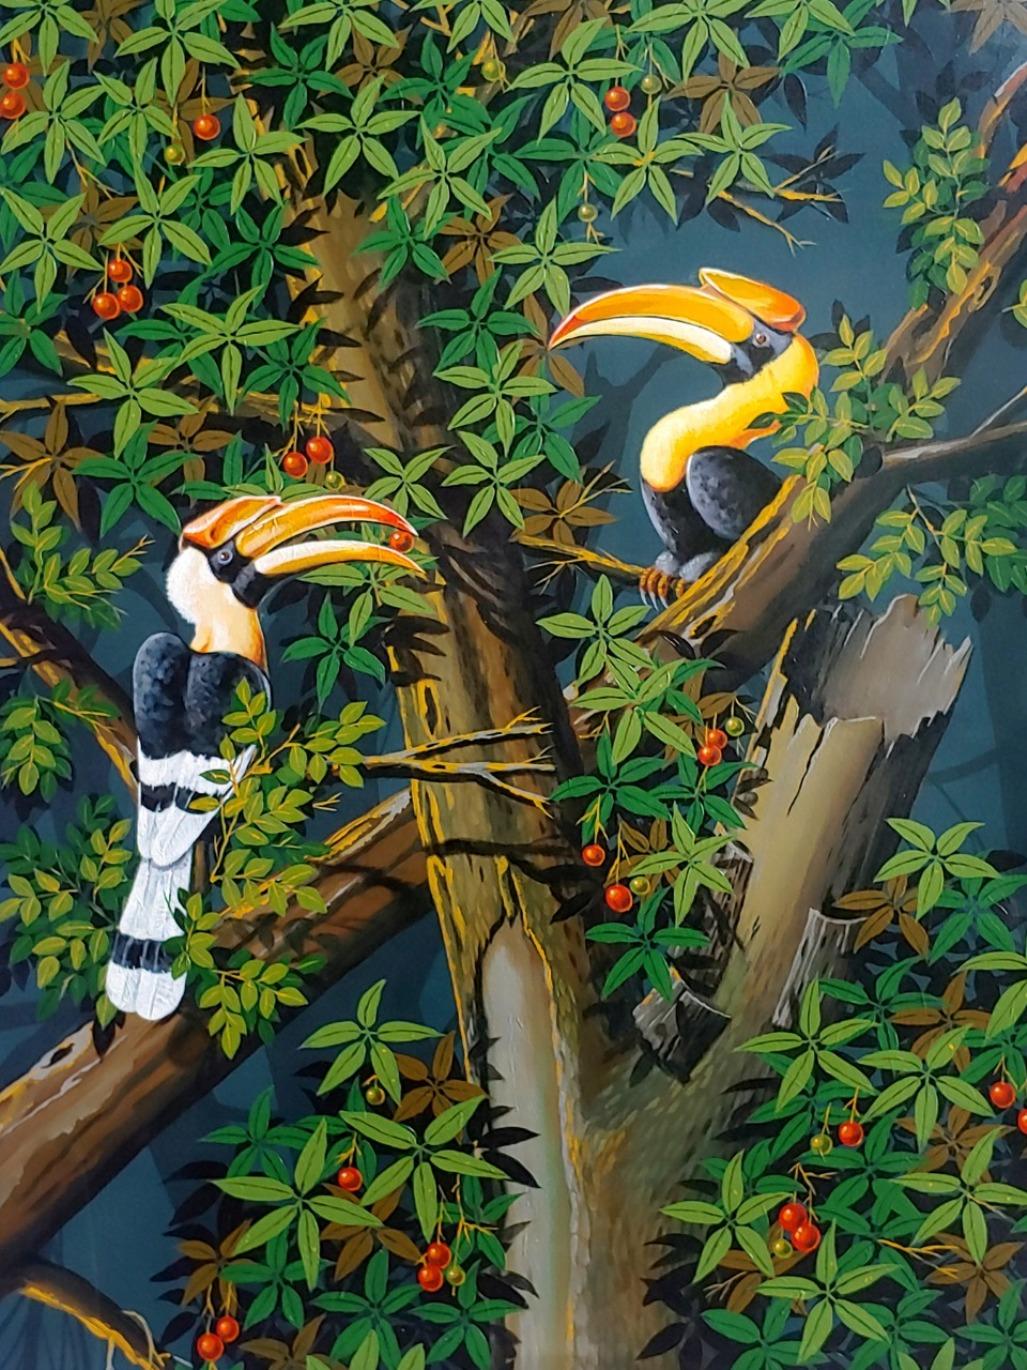 Varghese Kalathil Figurative Painting - The Hornbills, Acrylic on Canvas, Black, Green by Contemporary Artist "In Stock"